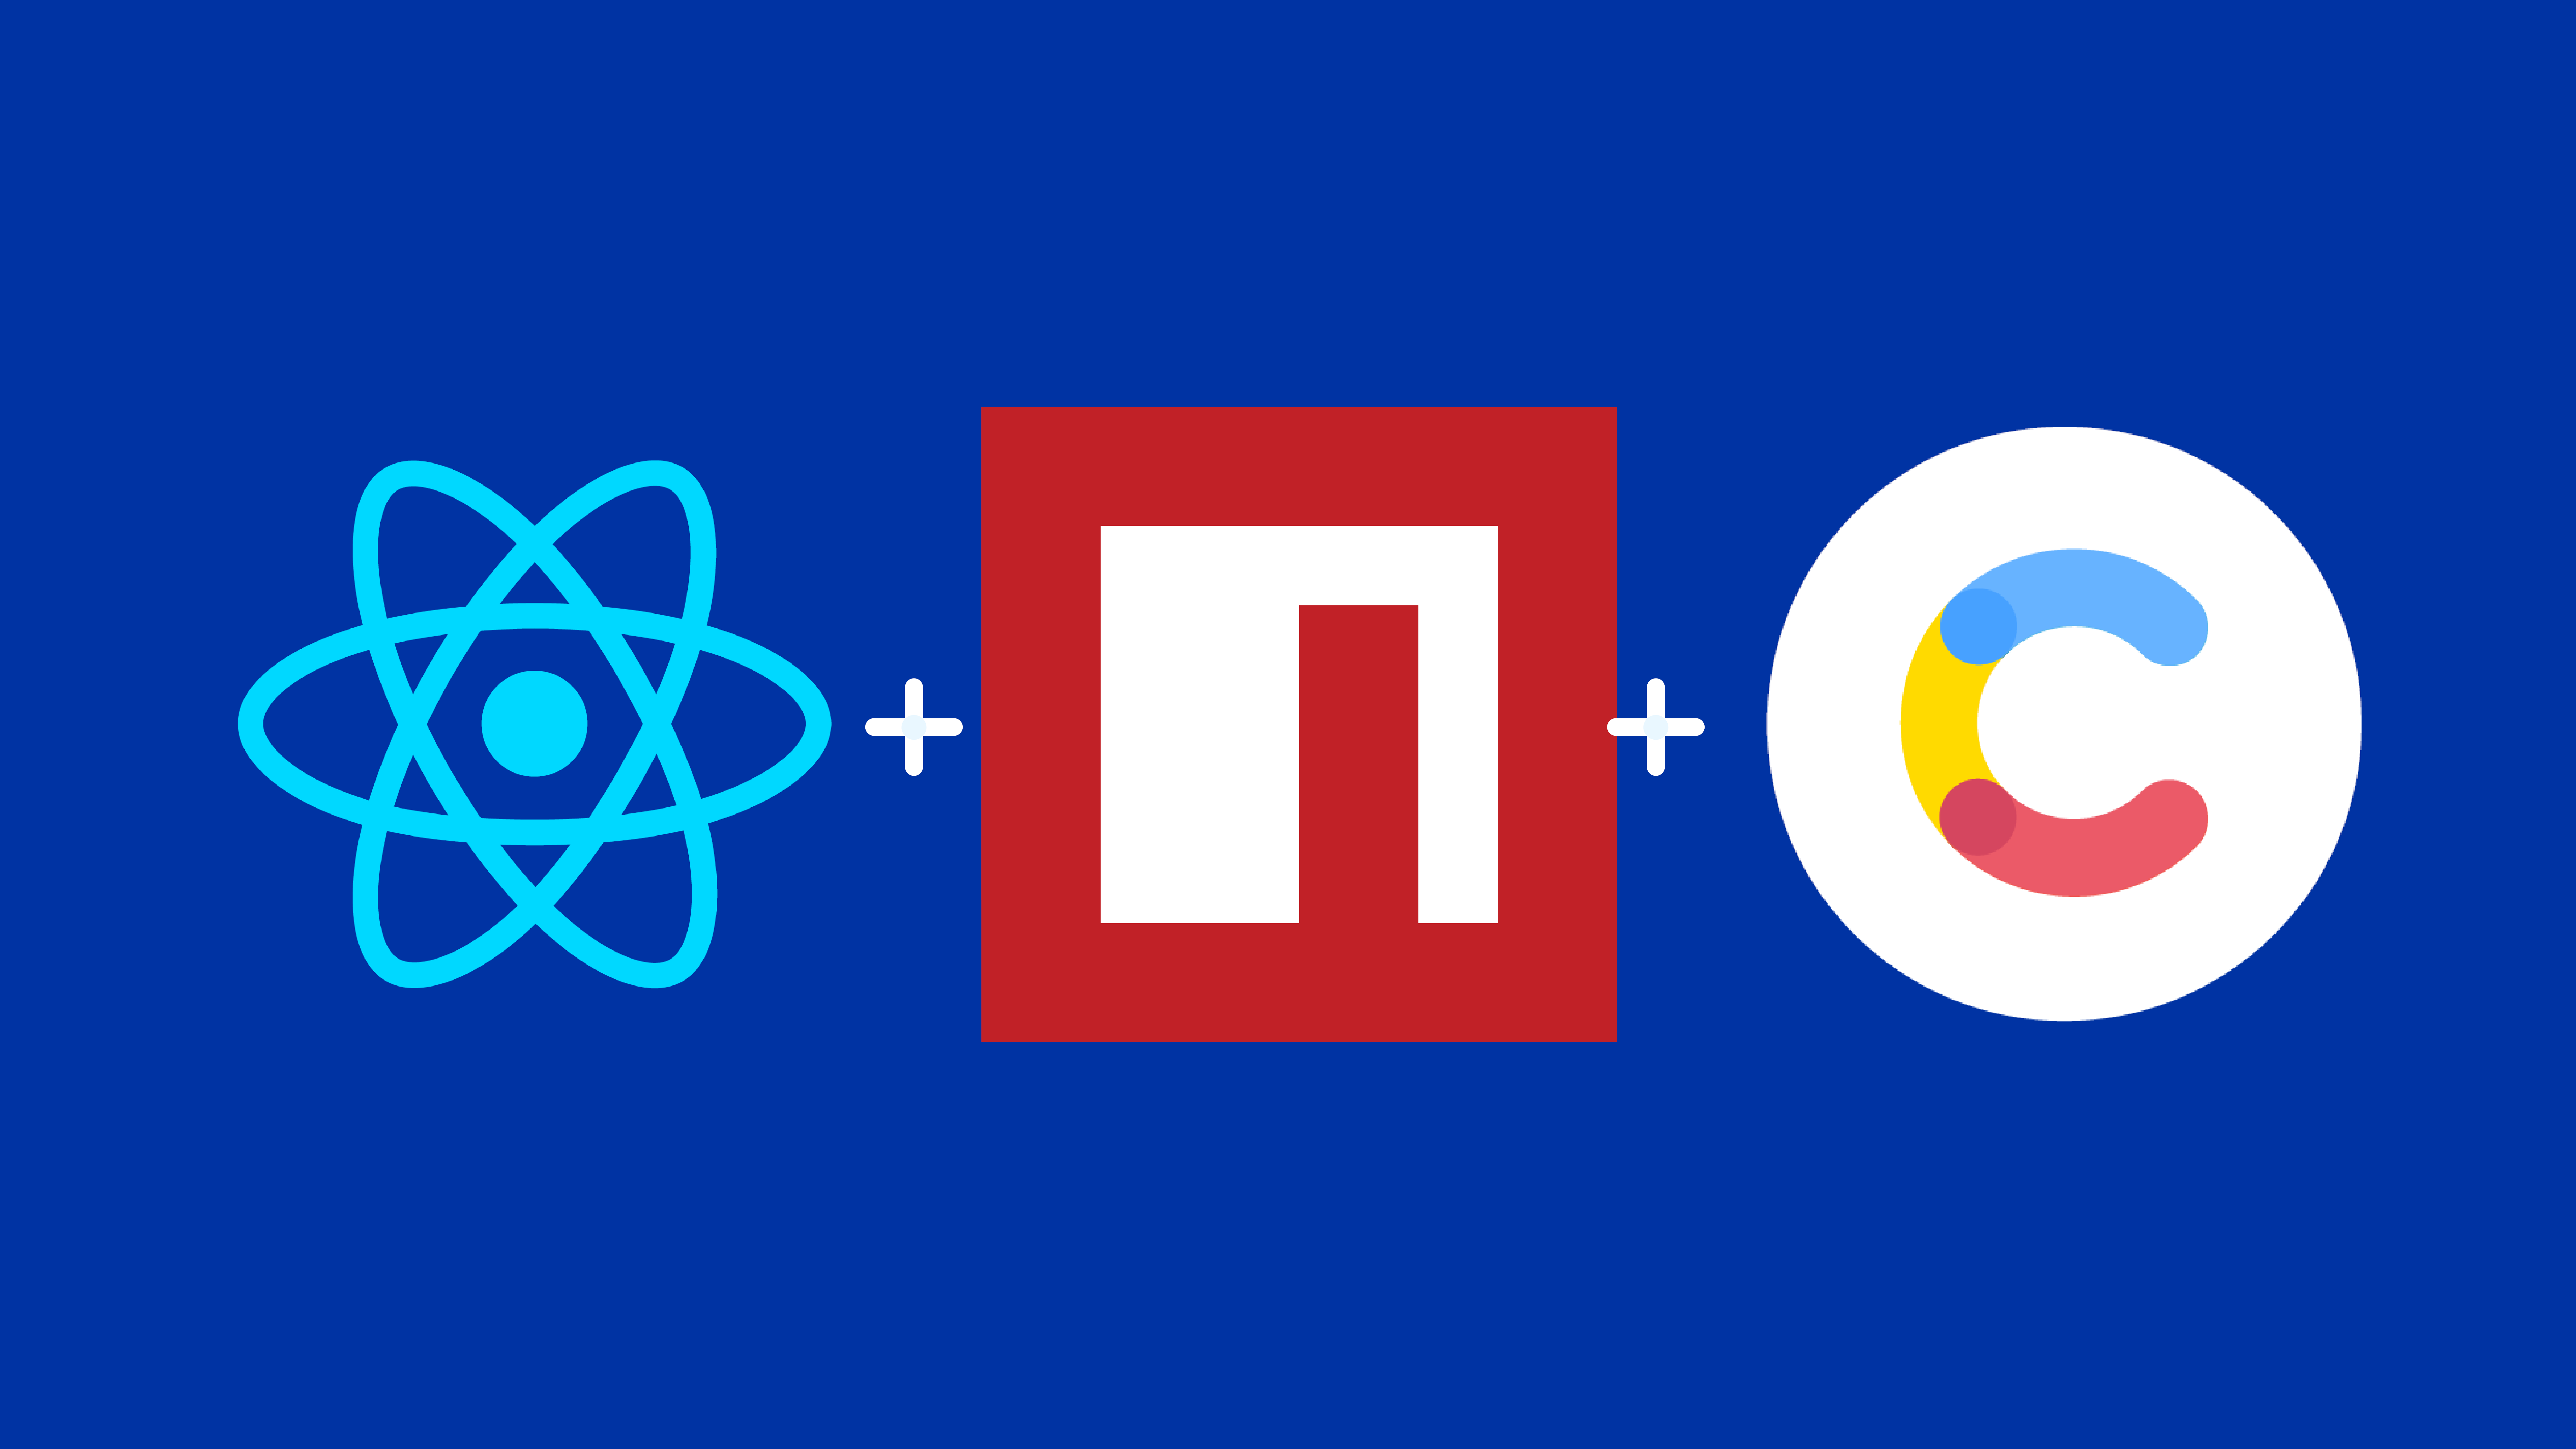 React, NPM and Contentful logos with plus icons